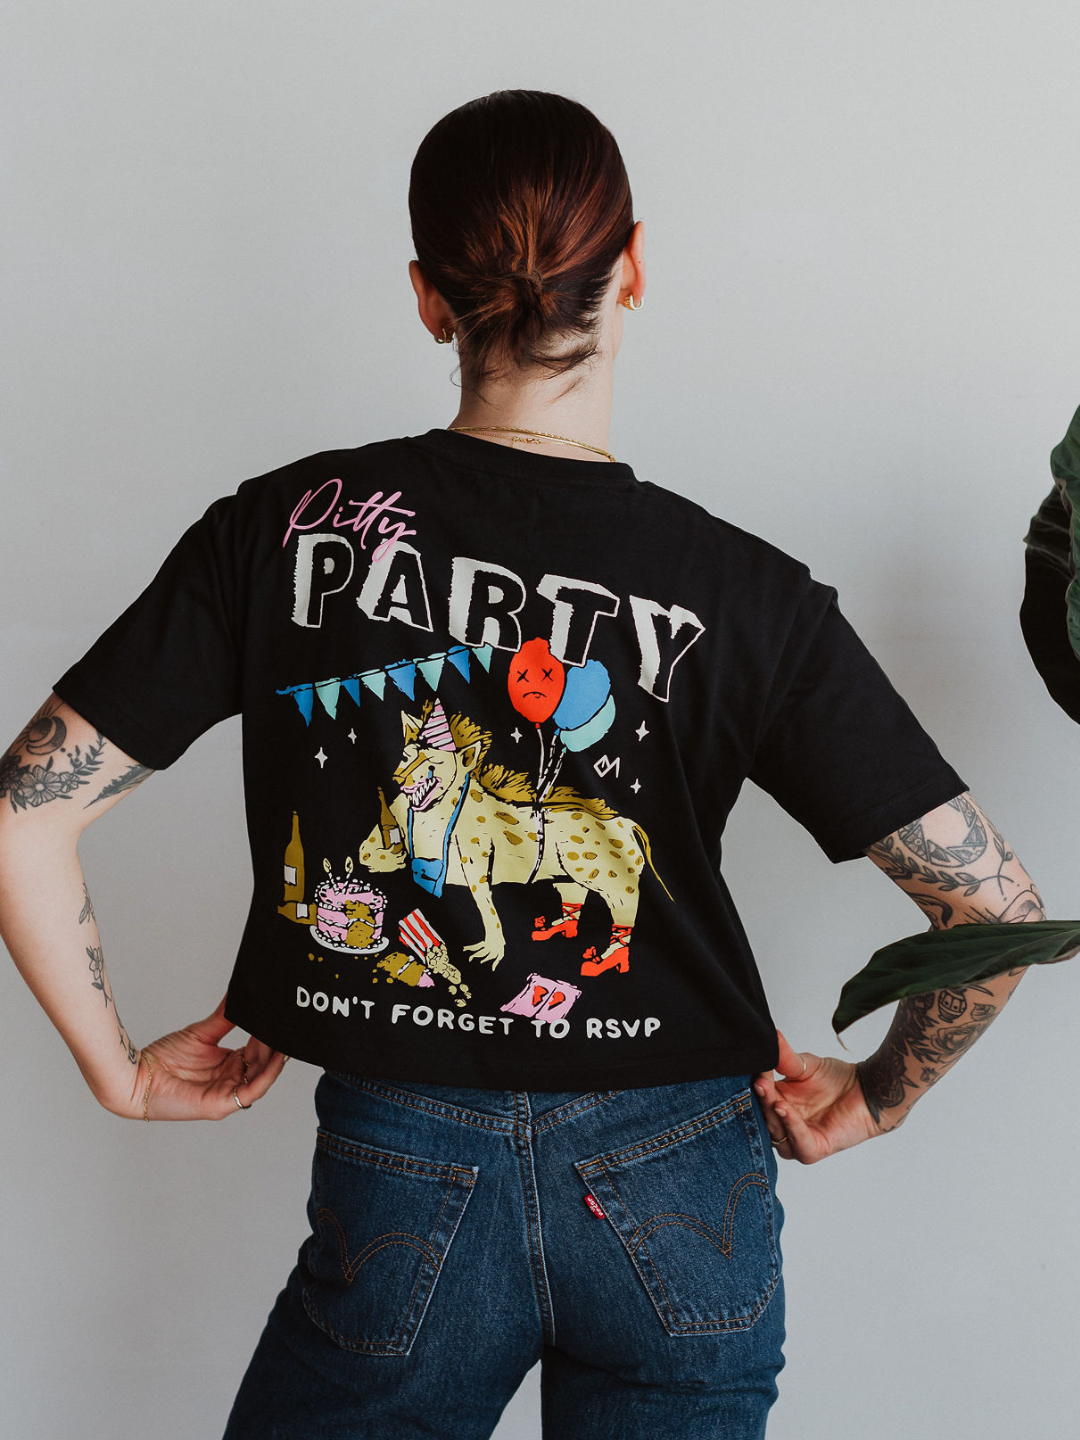 Pity Party T-Shirt - Octopied Mind